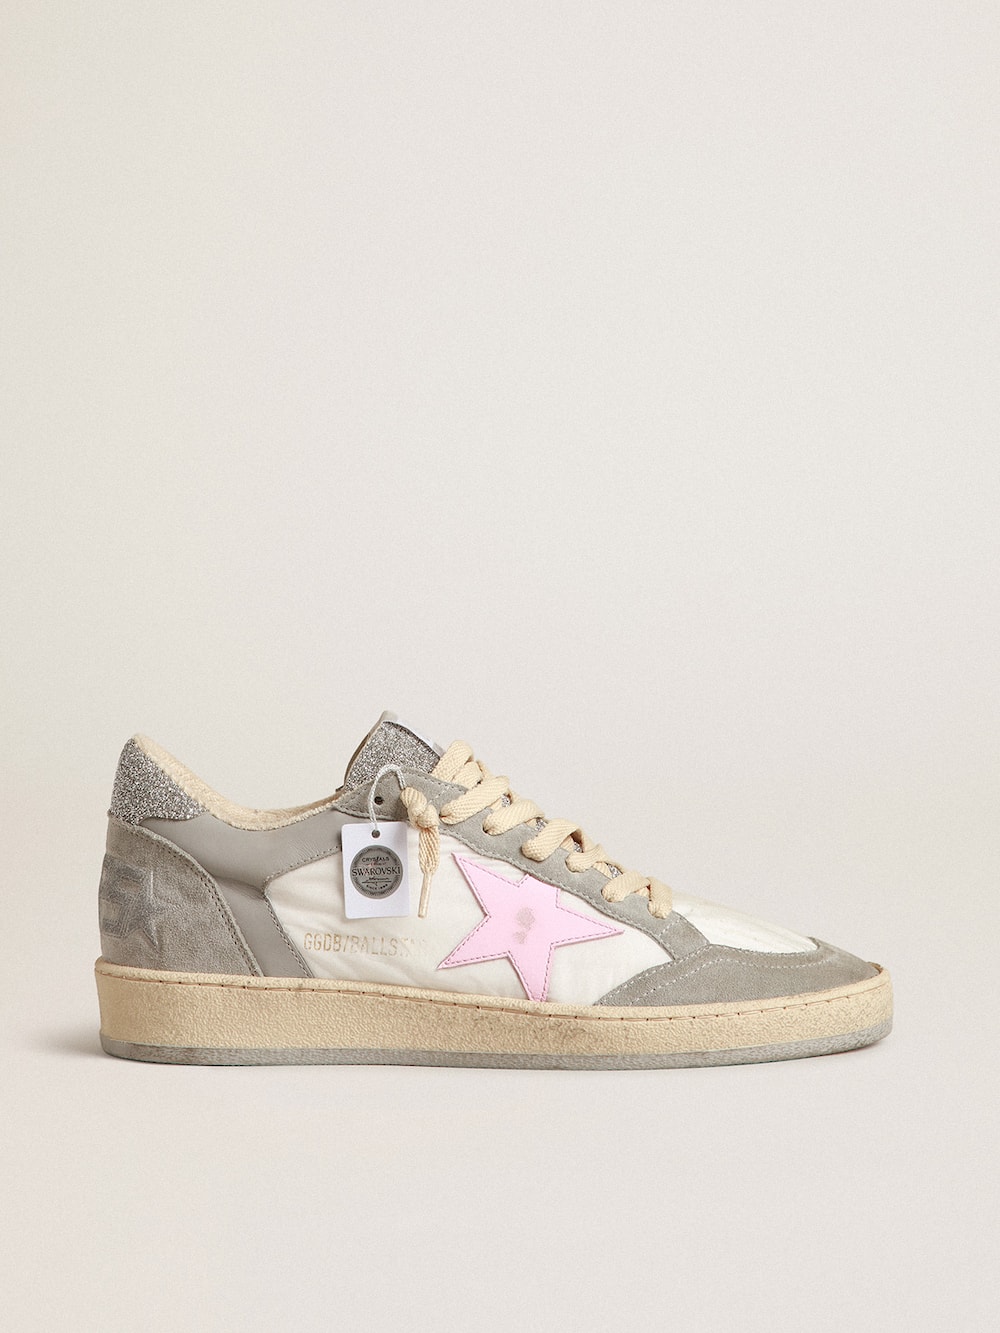 Golden Goose - Ball Star LTD with Swarovski crystal inserts and pink star in 